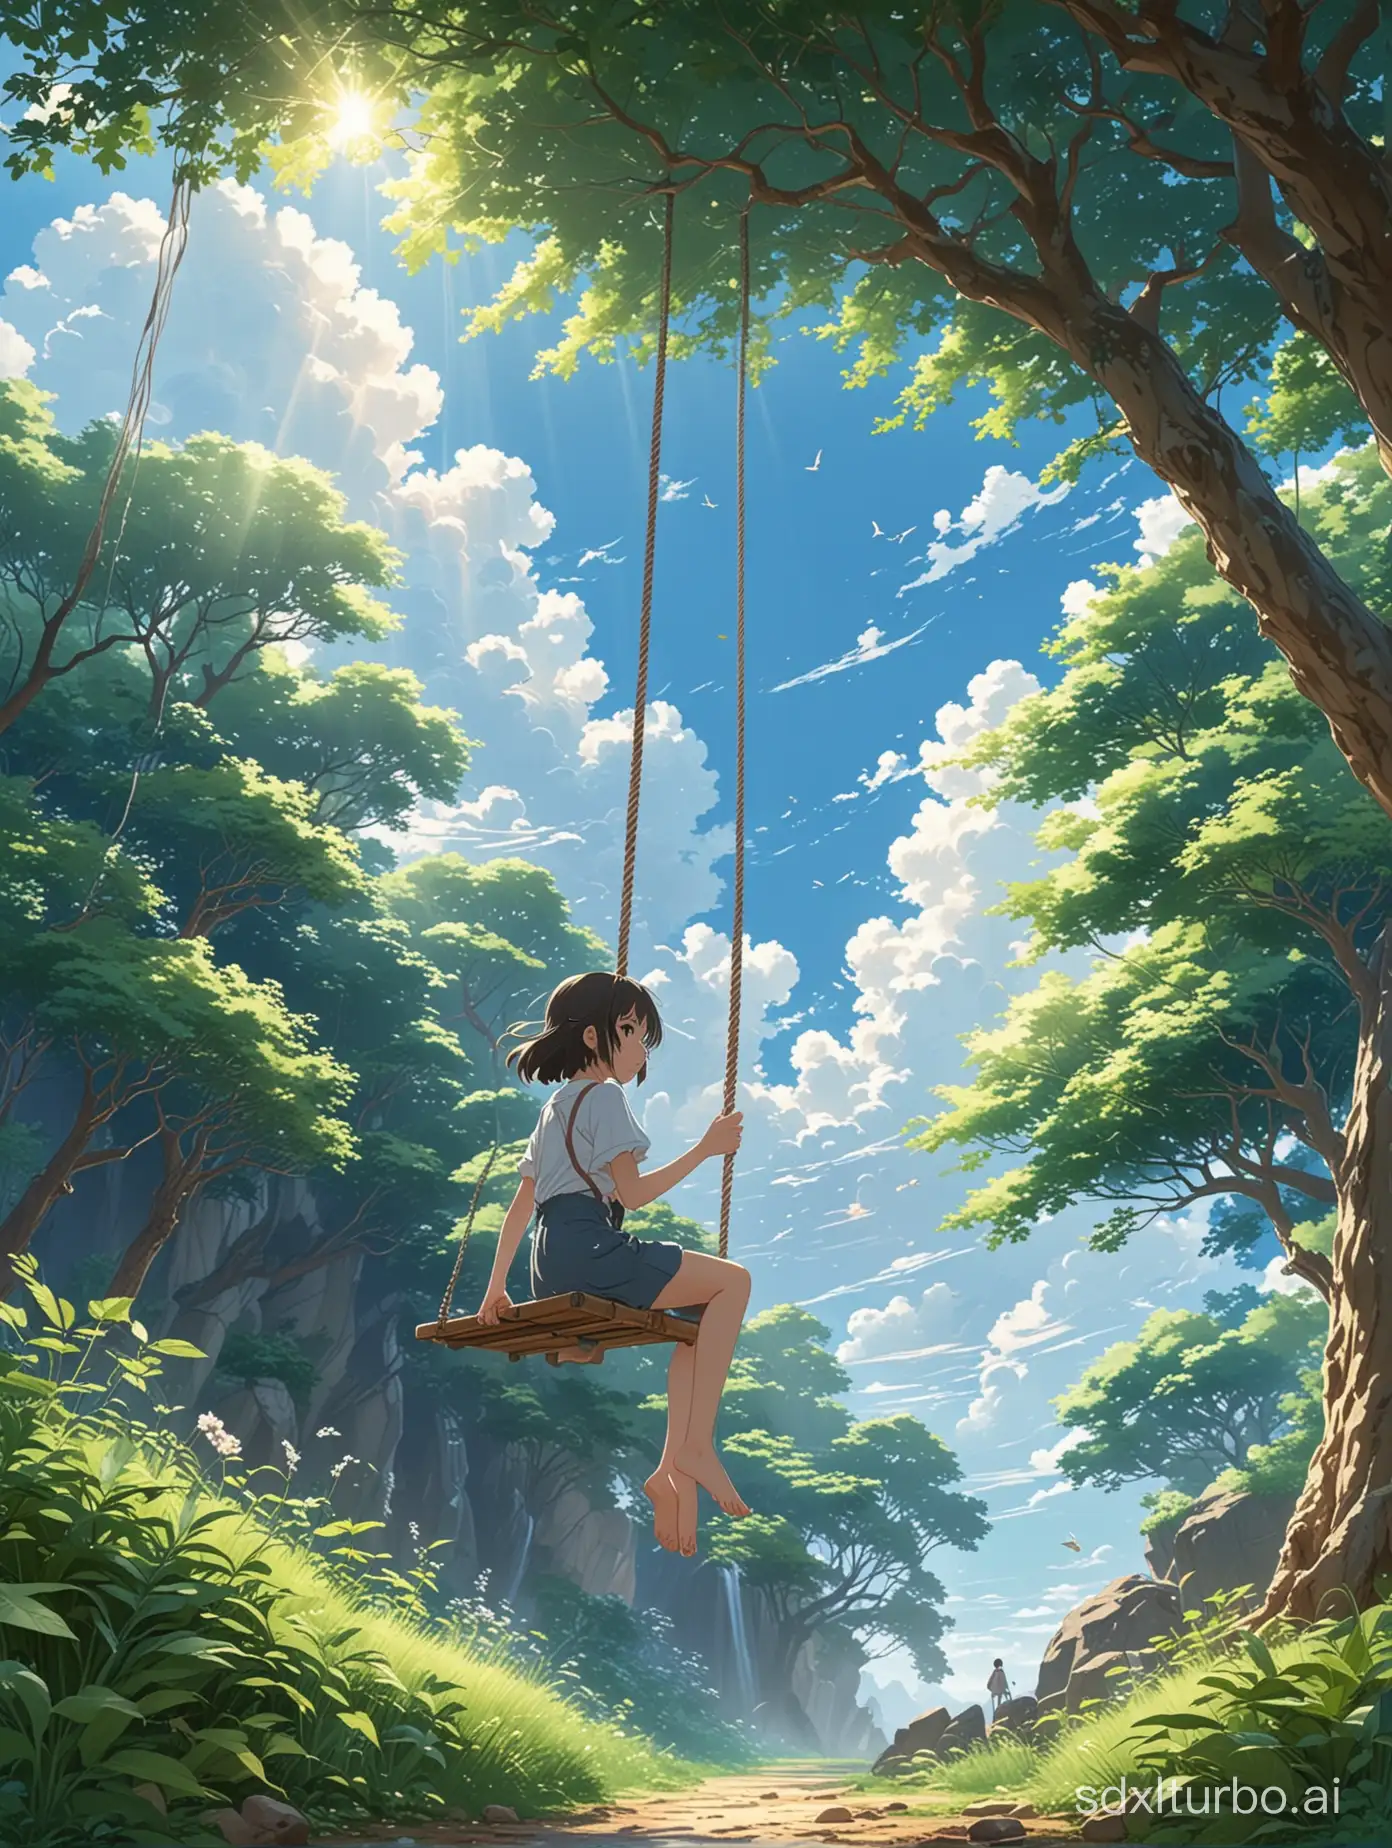 Tranquil-Anime-Scene-of-Young-Girl-on-Wooden-Swing-Under-Lush-Tree